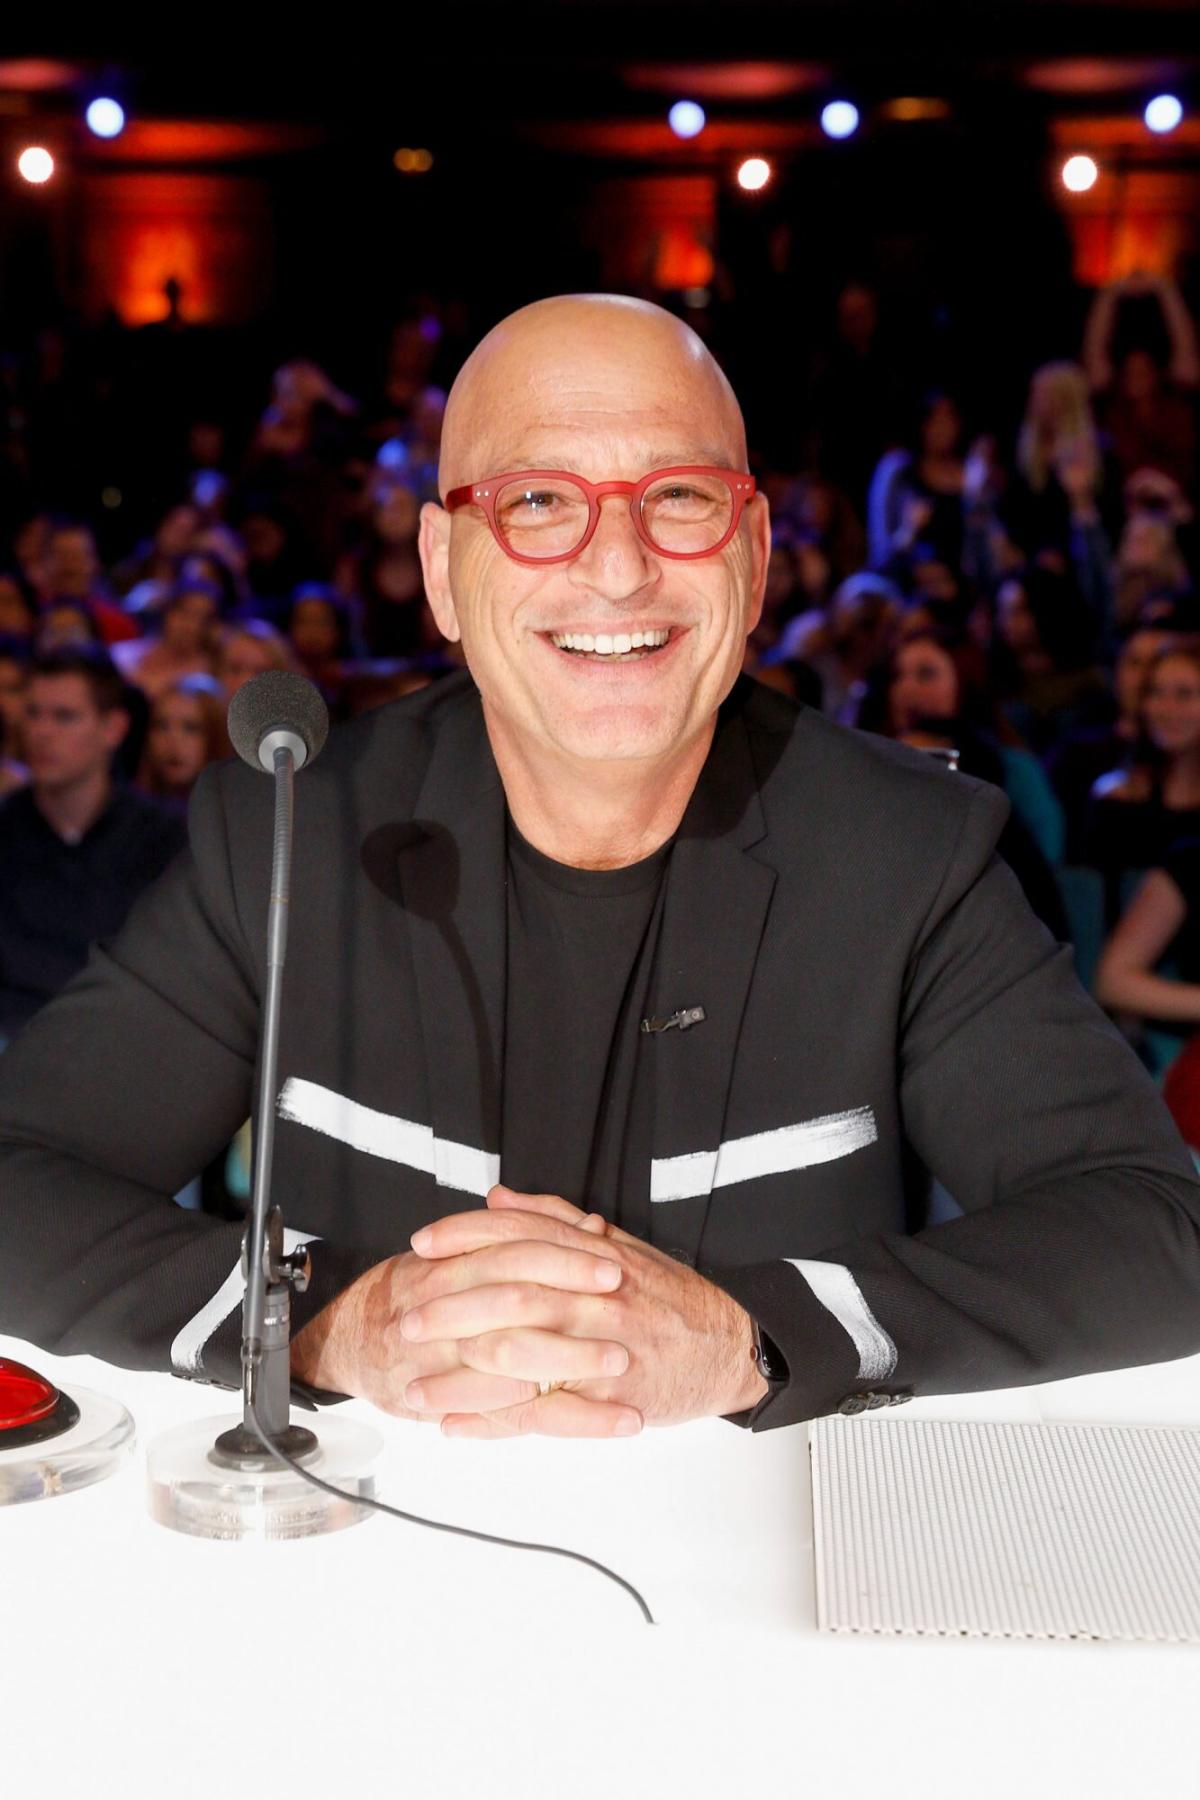 AGT's Howie Mandel runs in game of tag with granddaughter just days after  being hospitalized for fainting at Starbucks